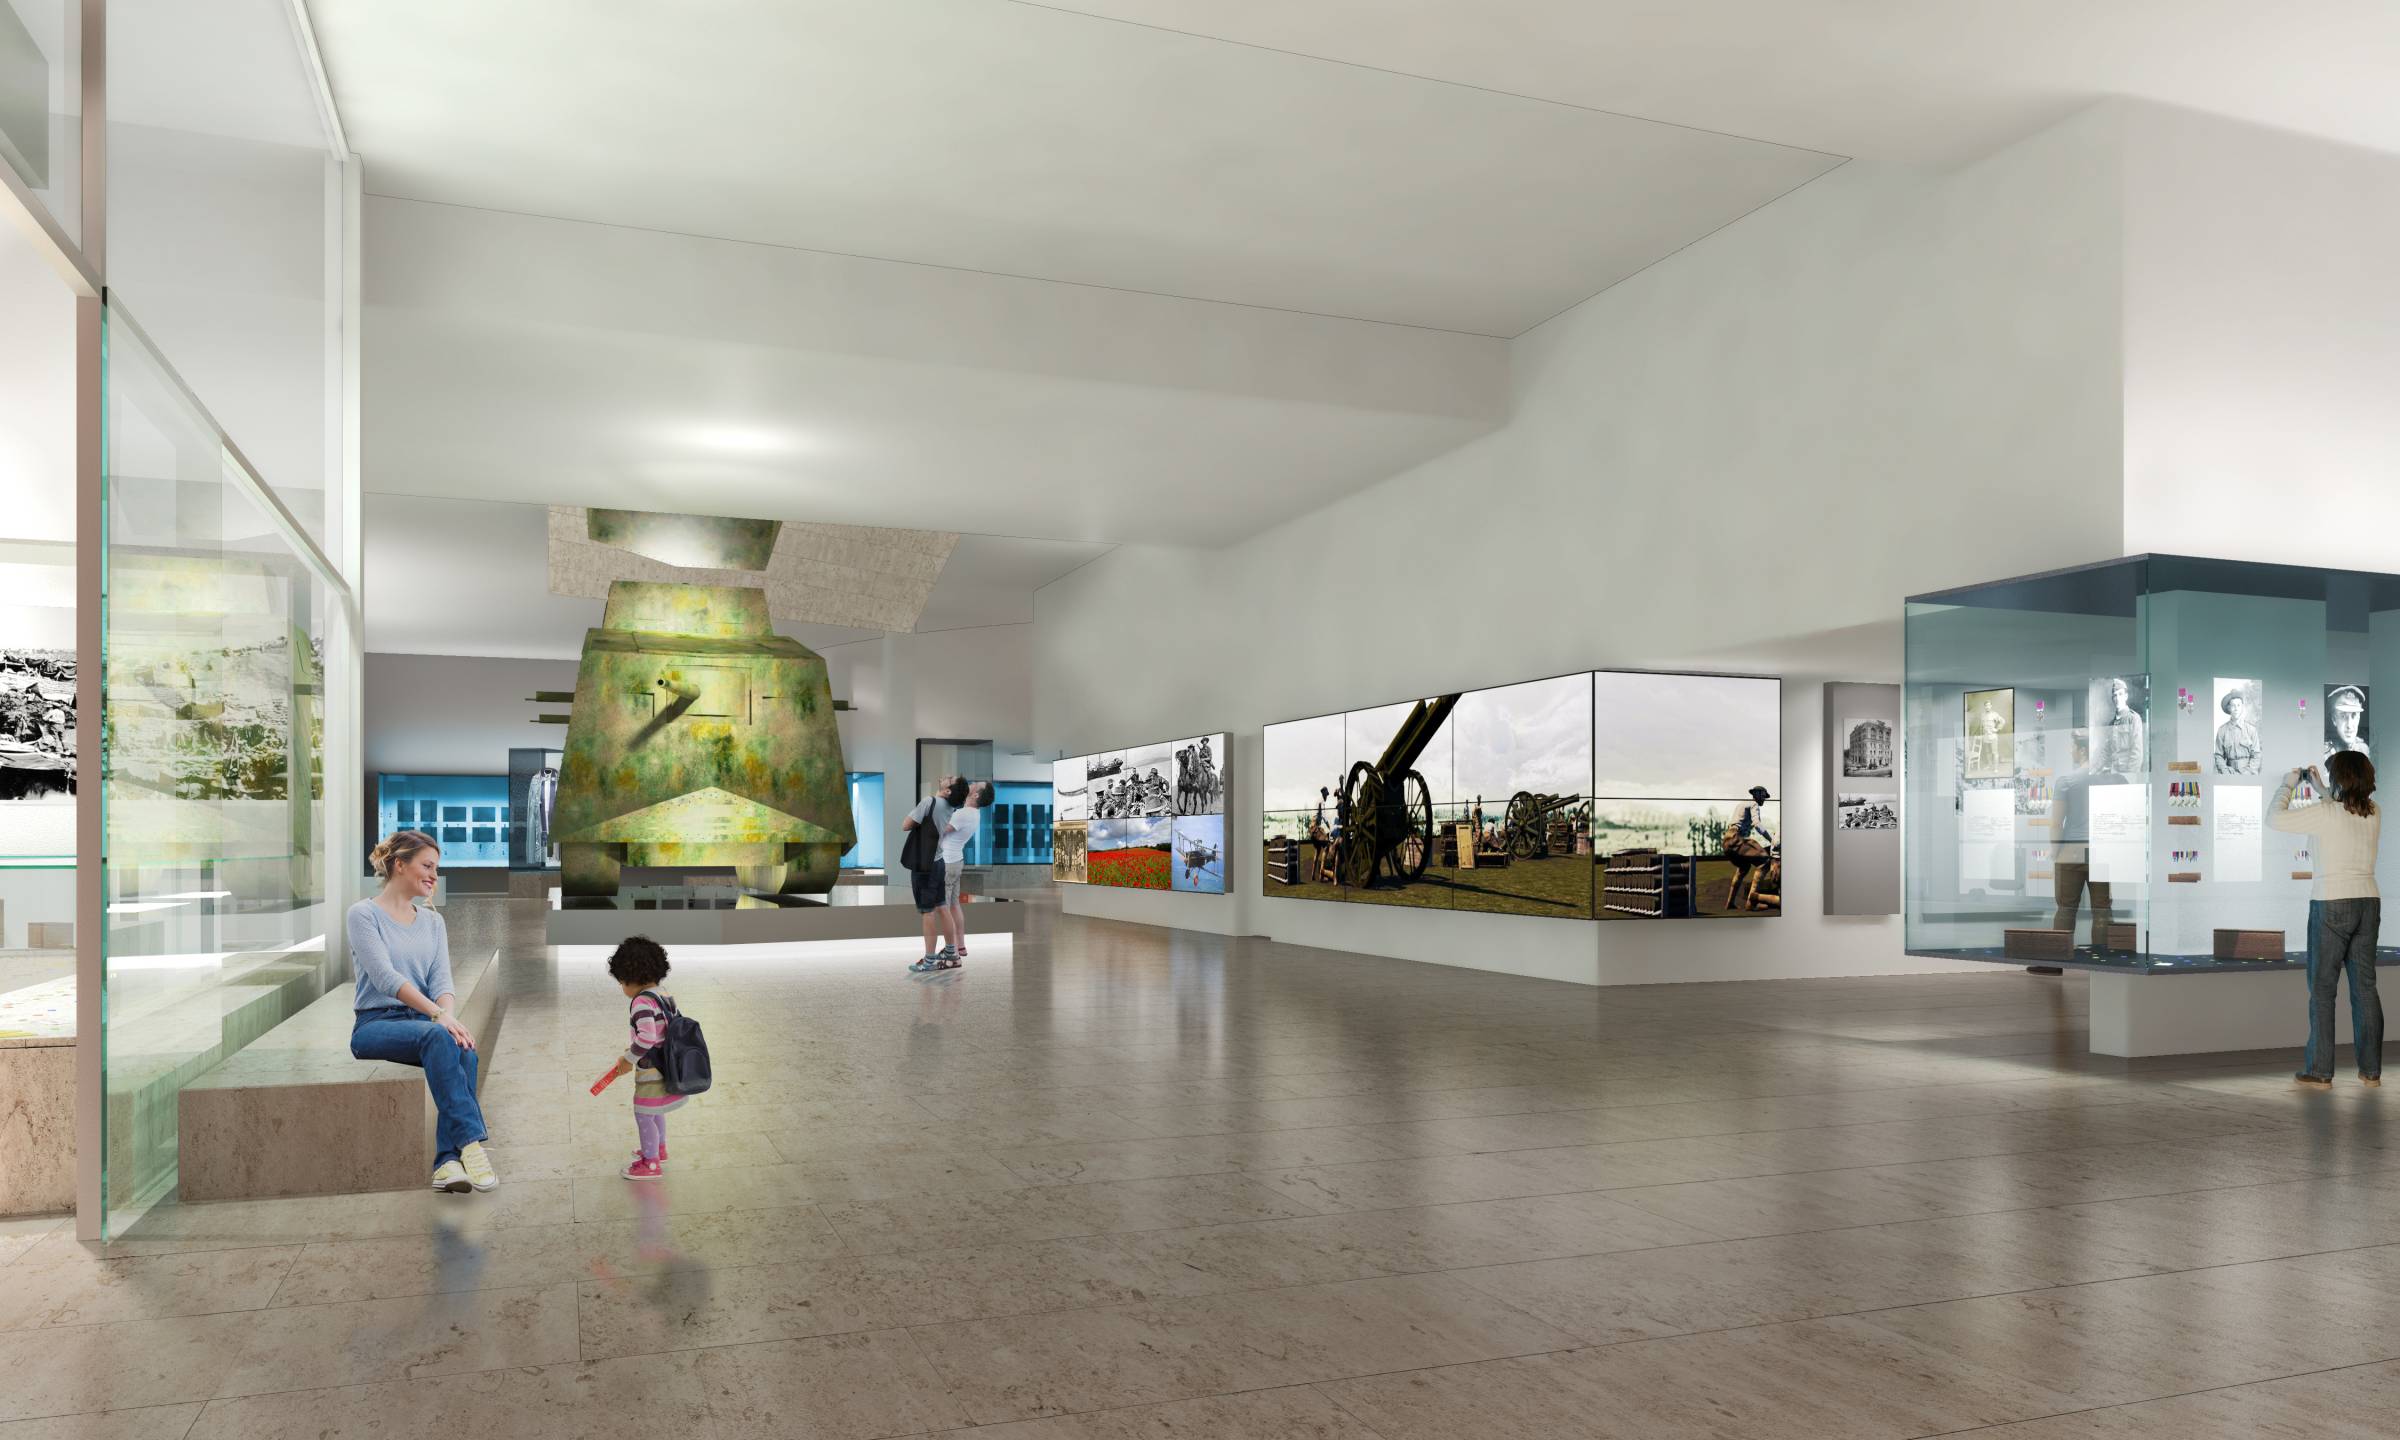 The Queensland Museum Anzac Legacy Gallery